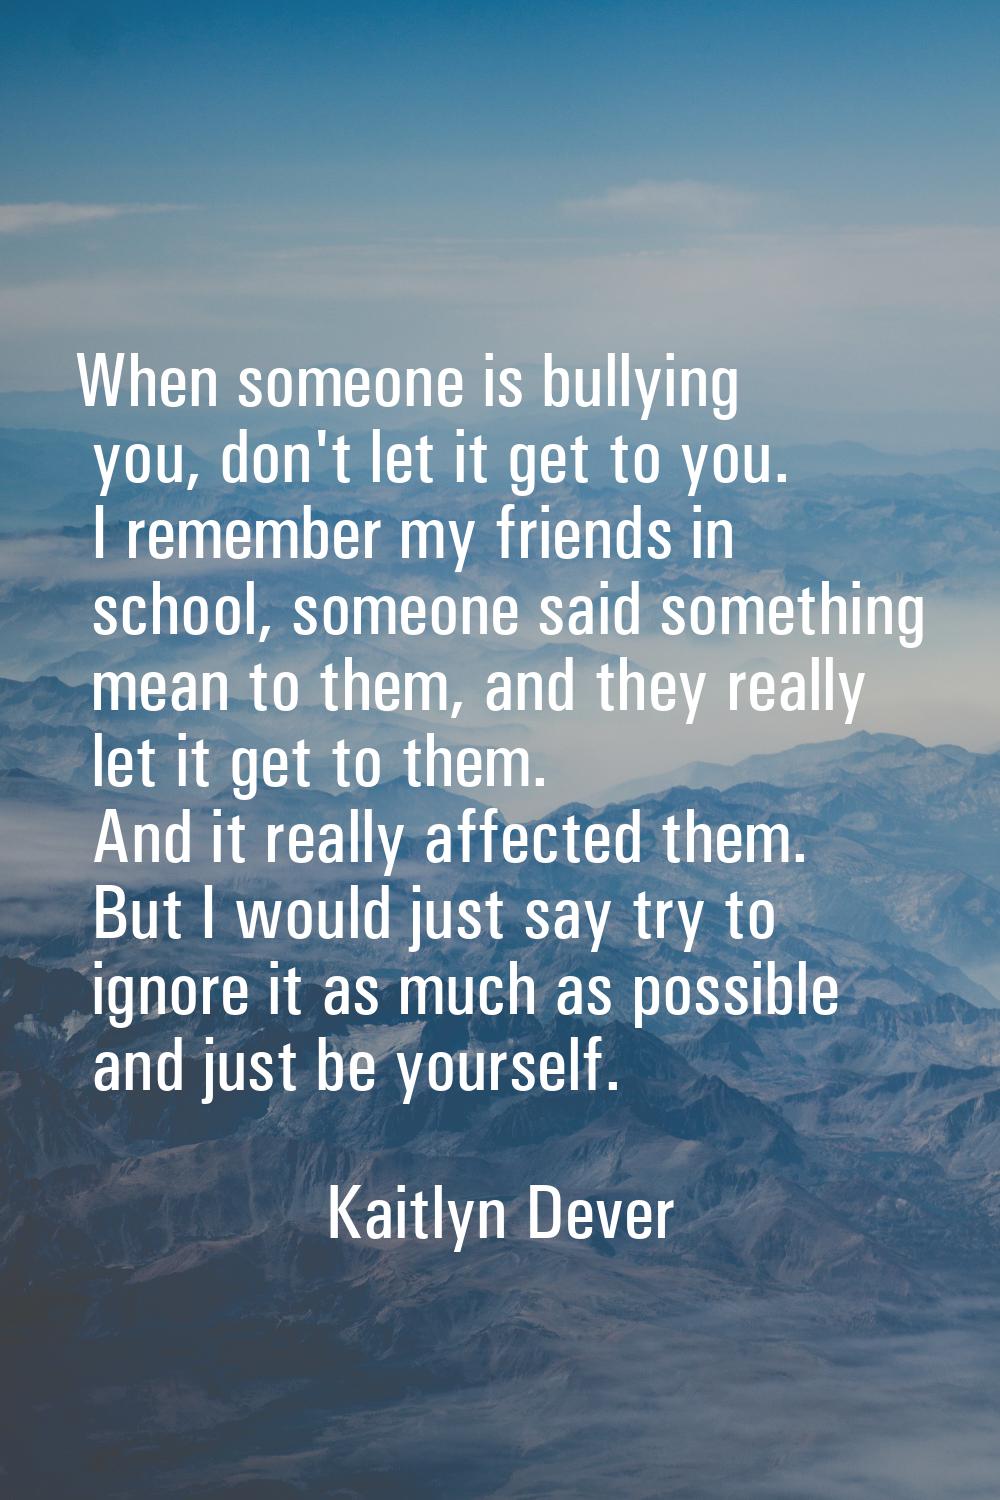 When someone is bullying you, don't let it get to you. I remember my friends in school, someone sai